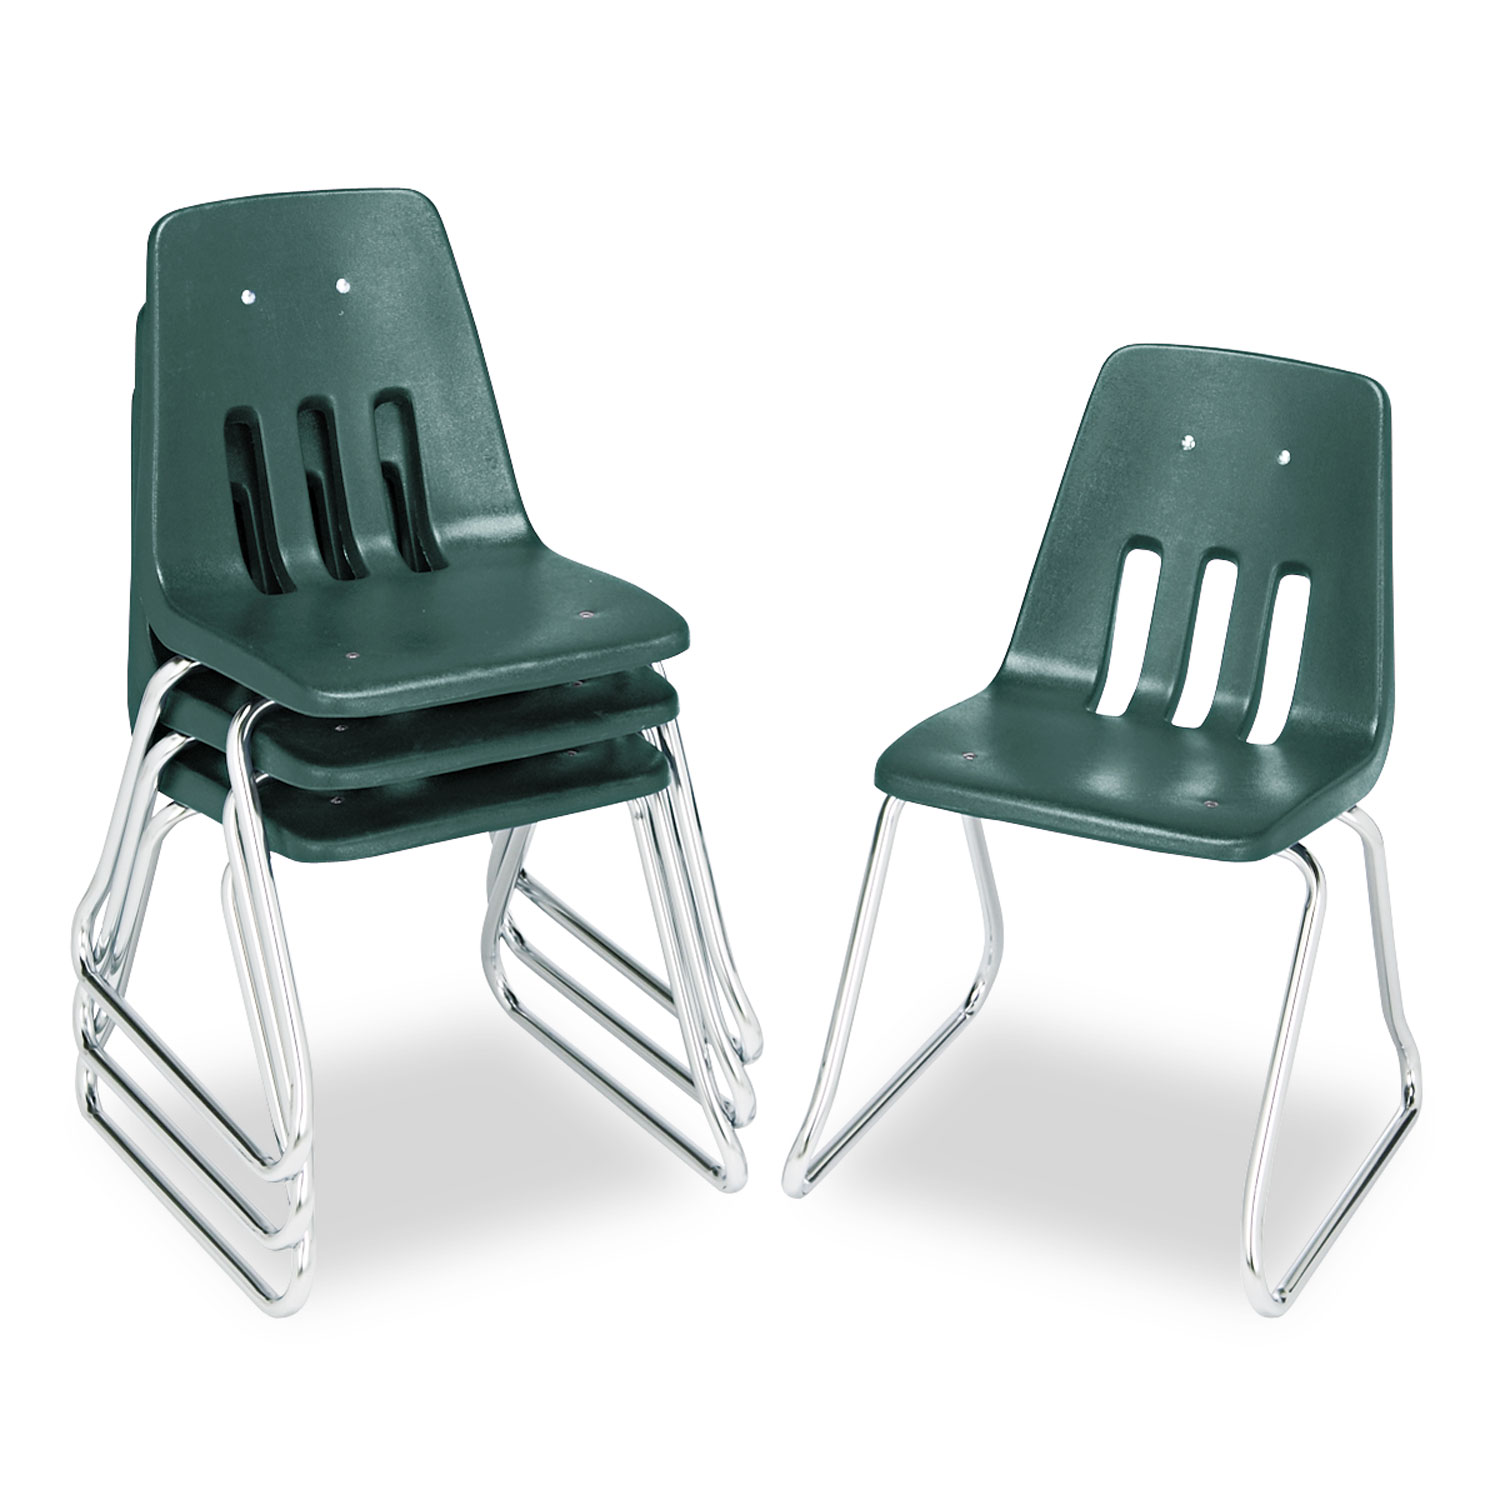 9600 Classic Series Classroom Chairs, 14 Seat Height, Forest Green/Chrome, 4/CT